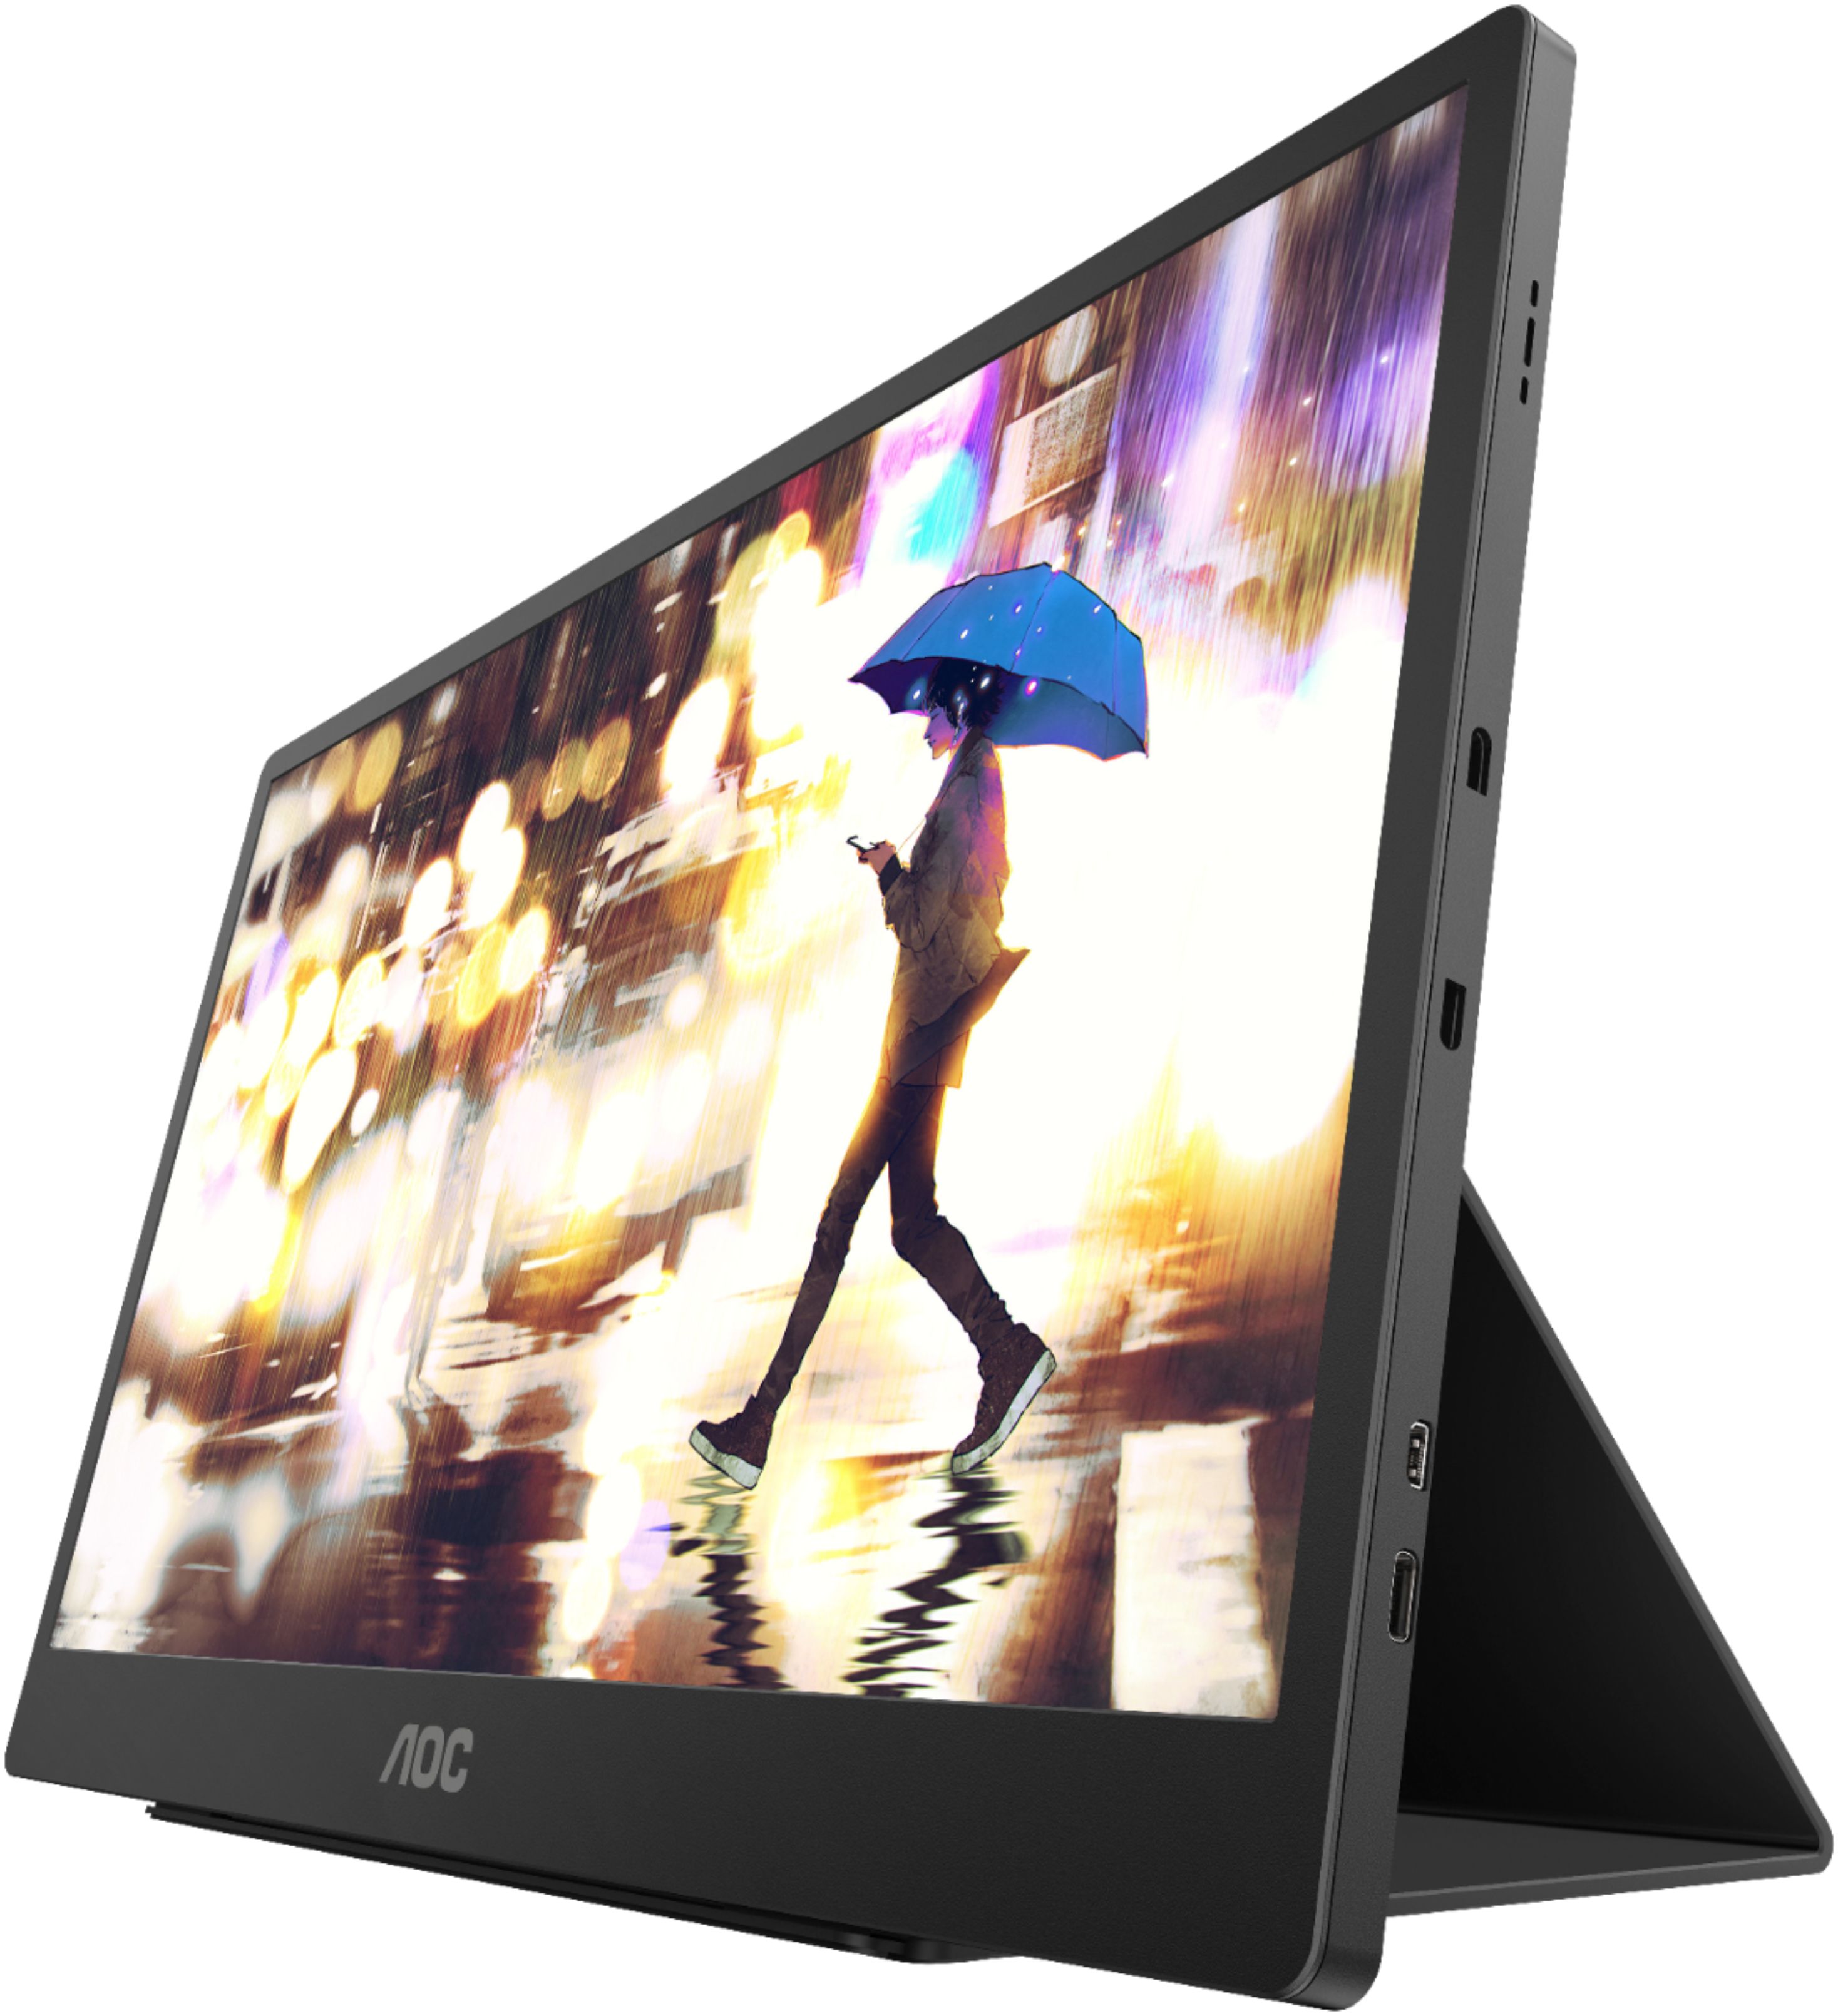 Angle View: AOC - 15.6" IPS Portable USB-C Touch Monitor - Black